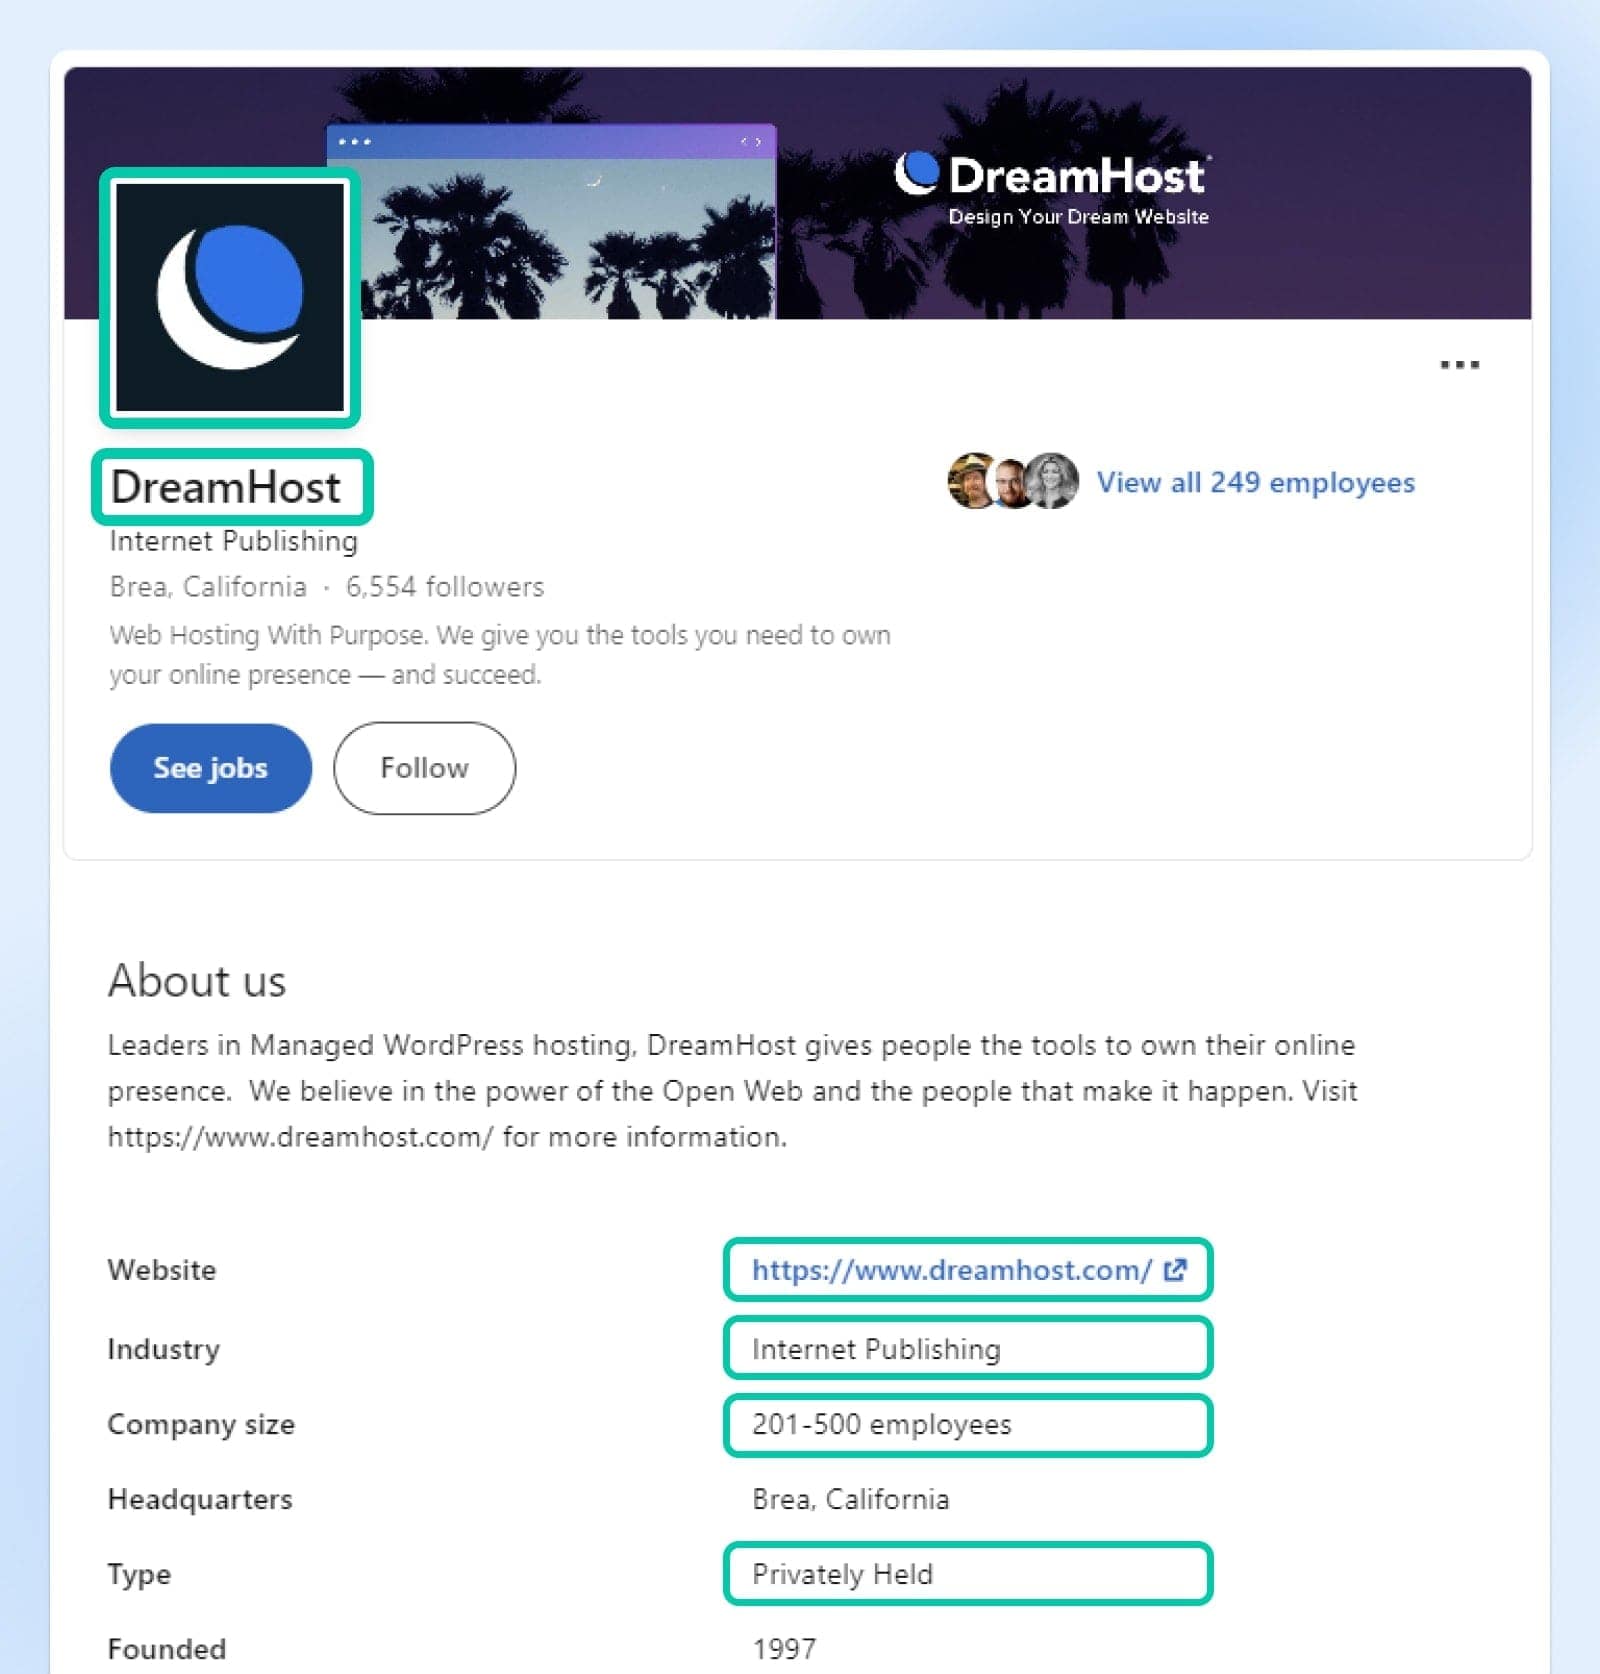 screenshot of DreamHost's company with homepage URL, internet publishing, 201-500 for employees, and privately held for type